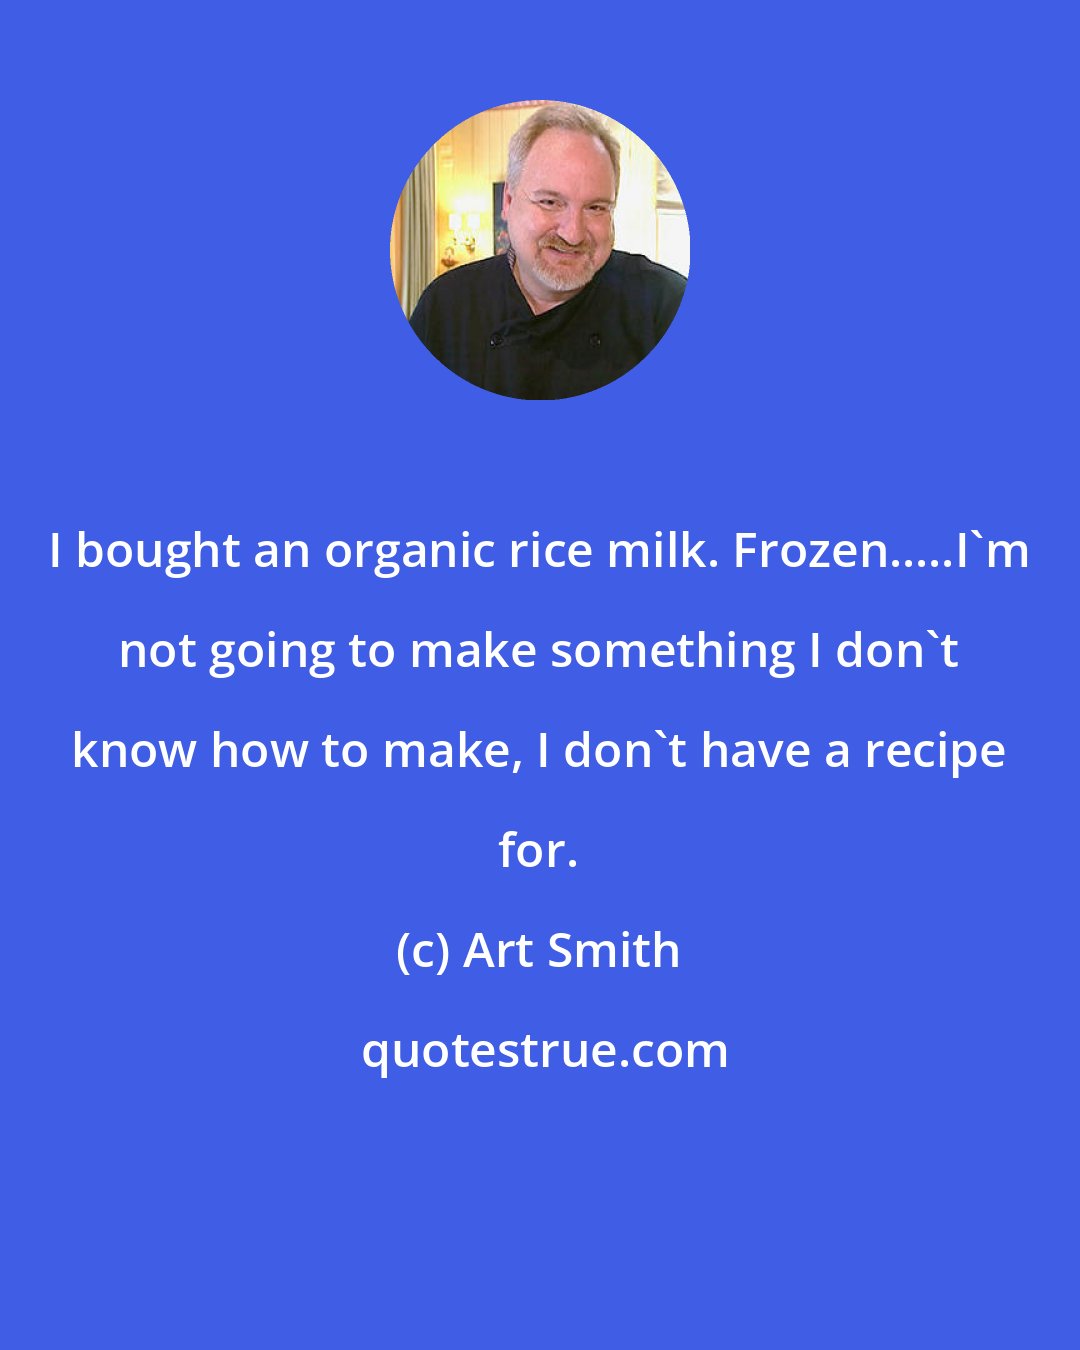 Art Smith: I bought an organic rice milk. Frozen.....I'm not going to make something I don't know how to make, I don't have a recipe for.